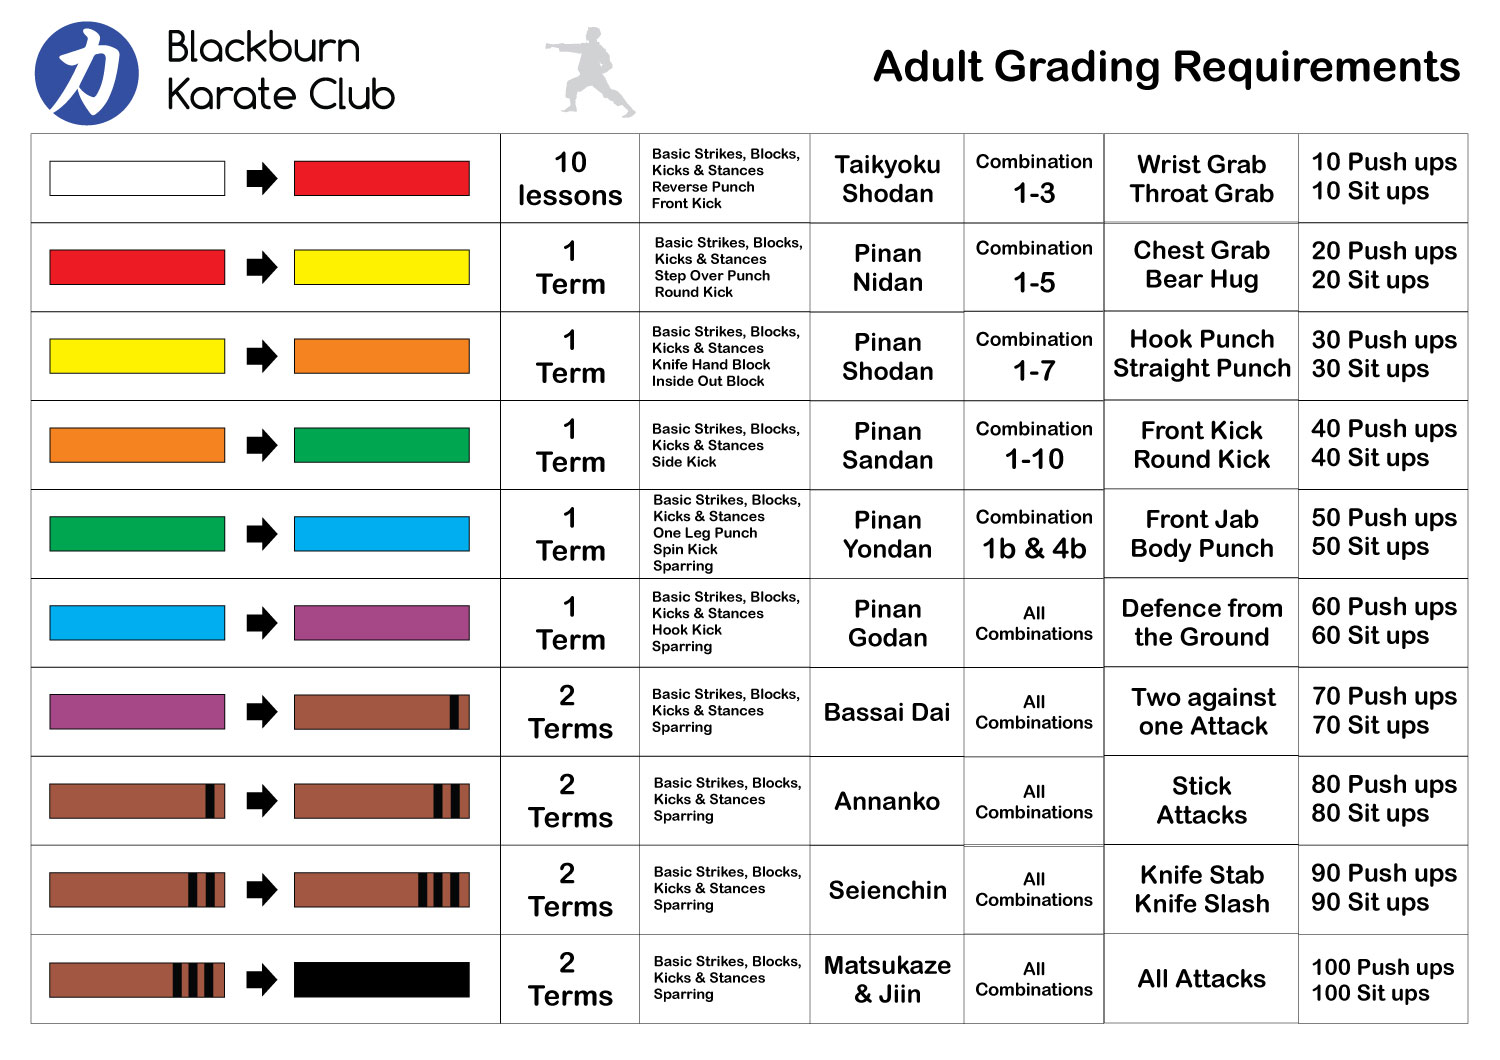 Adult Grading Requirements